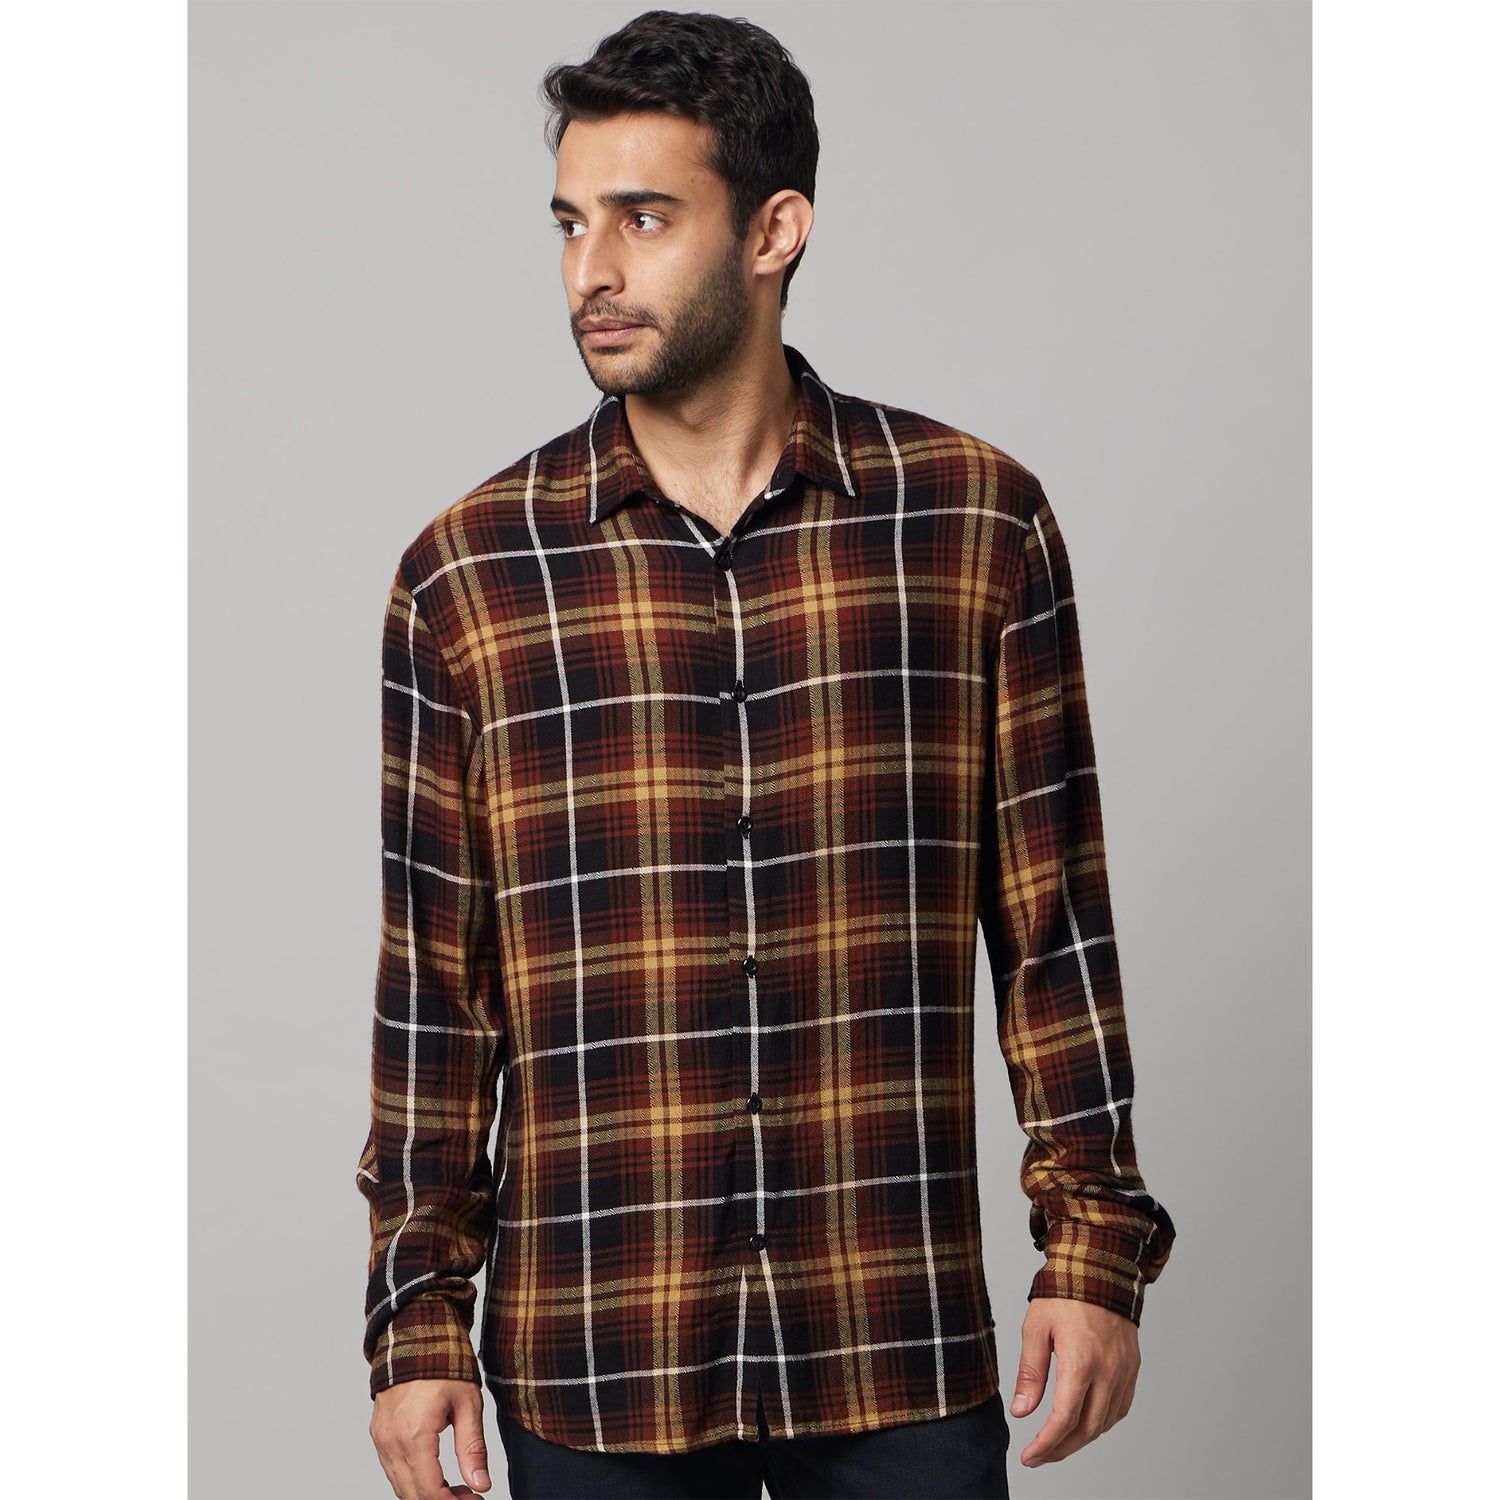 Soft Touch Checked Multi Long Sleeves Shirt